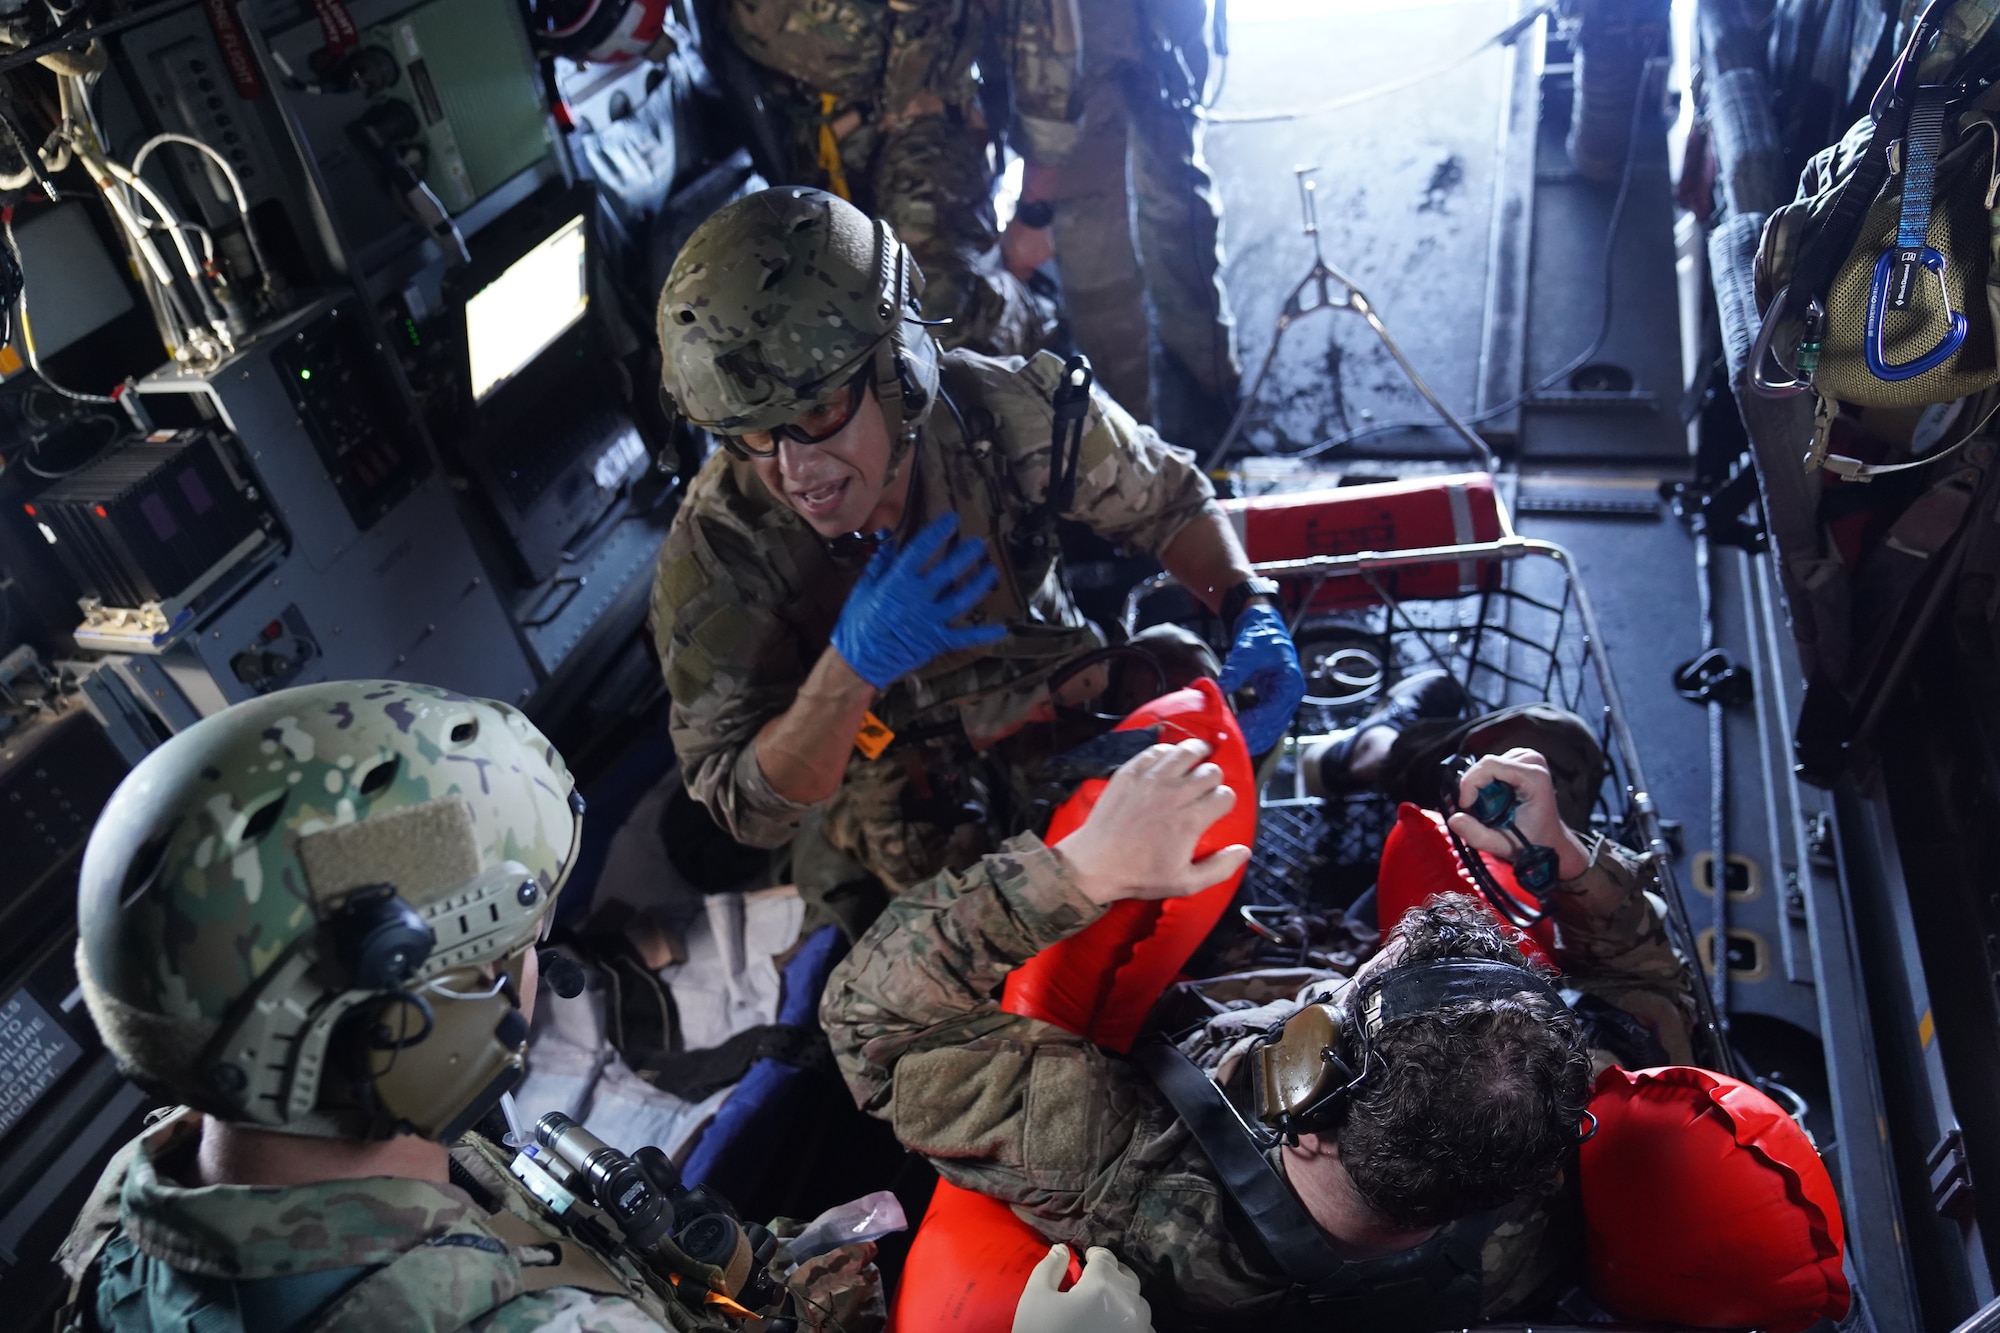 Major Shana Hirchert, 353rd Special Operations Support Squadron flight surgeon, directs initial medical triage and care of a recovered casualty role-player during an open water search and rescue training off the coast of Okinawa, Japan, Nov. 19, 2020.